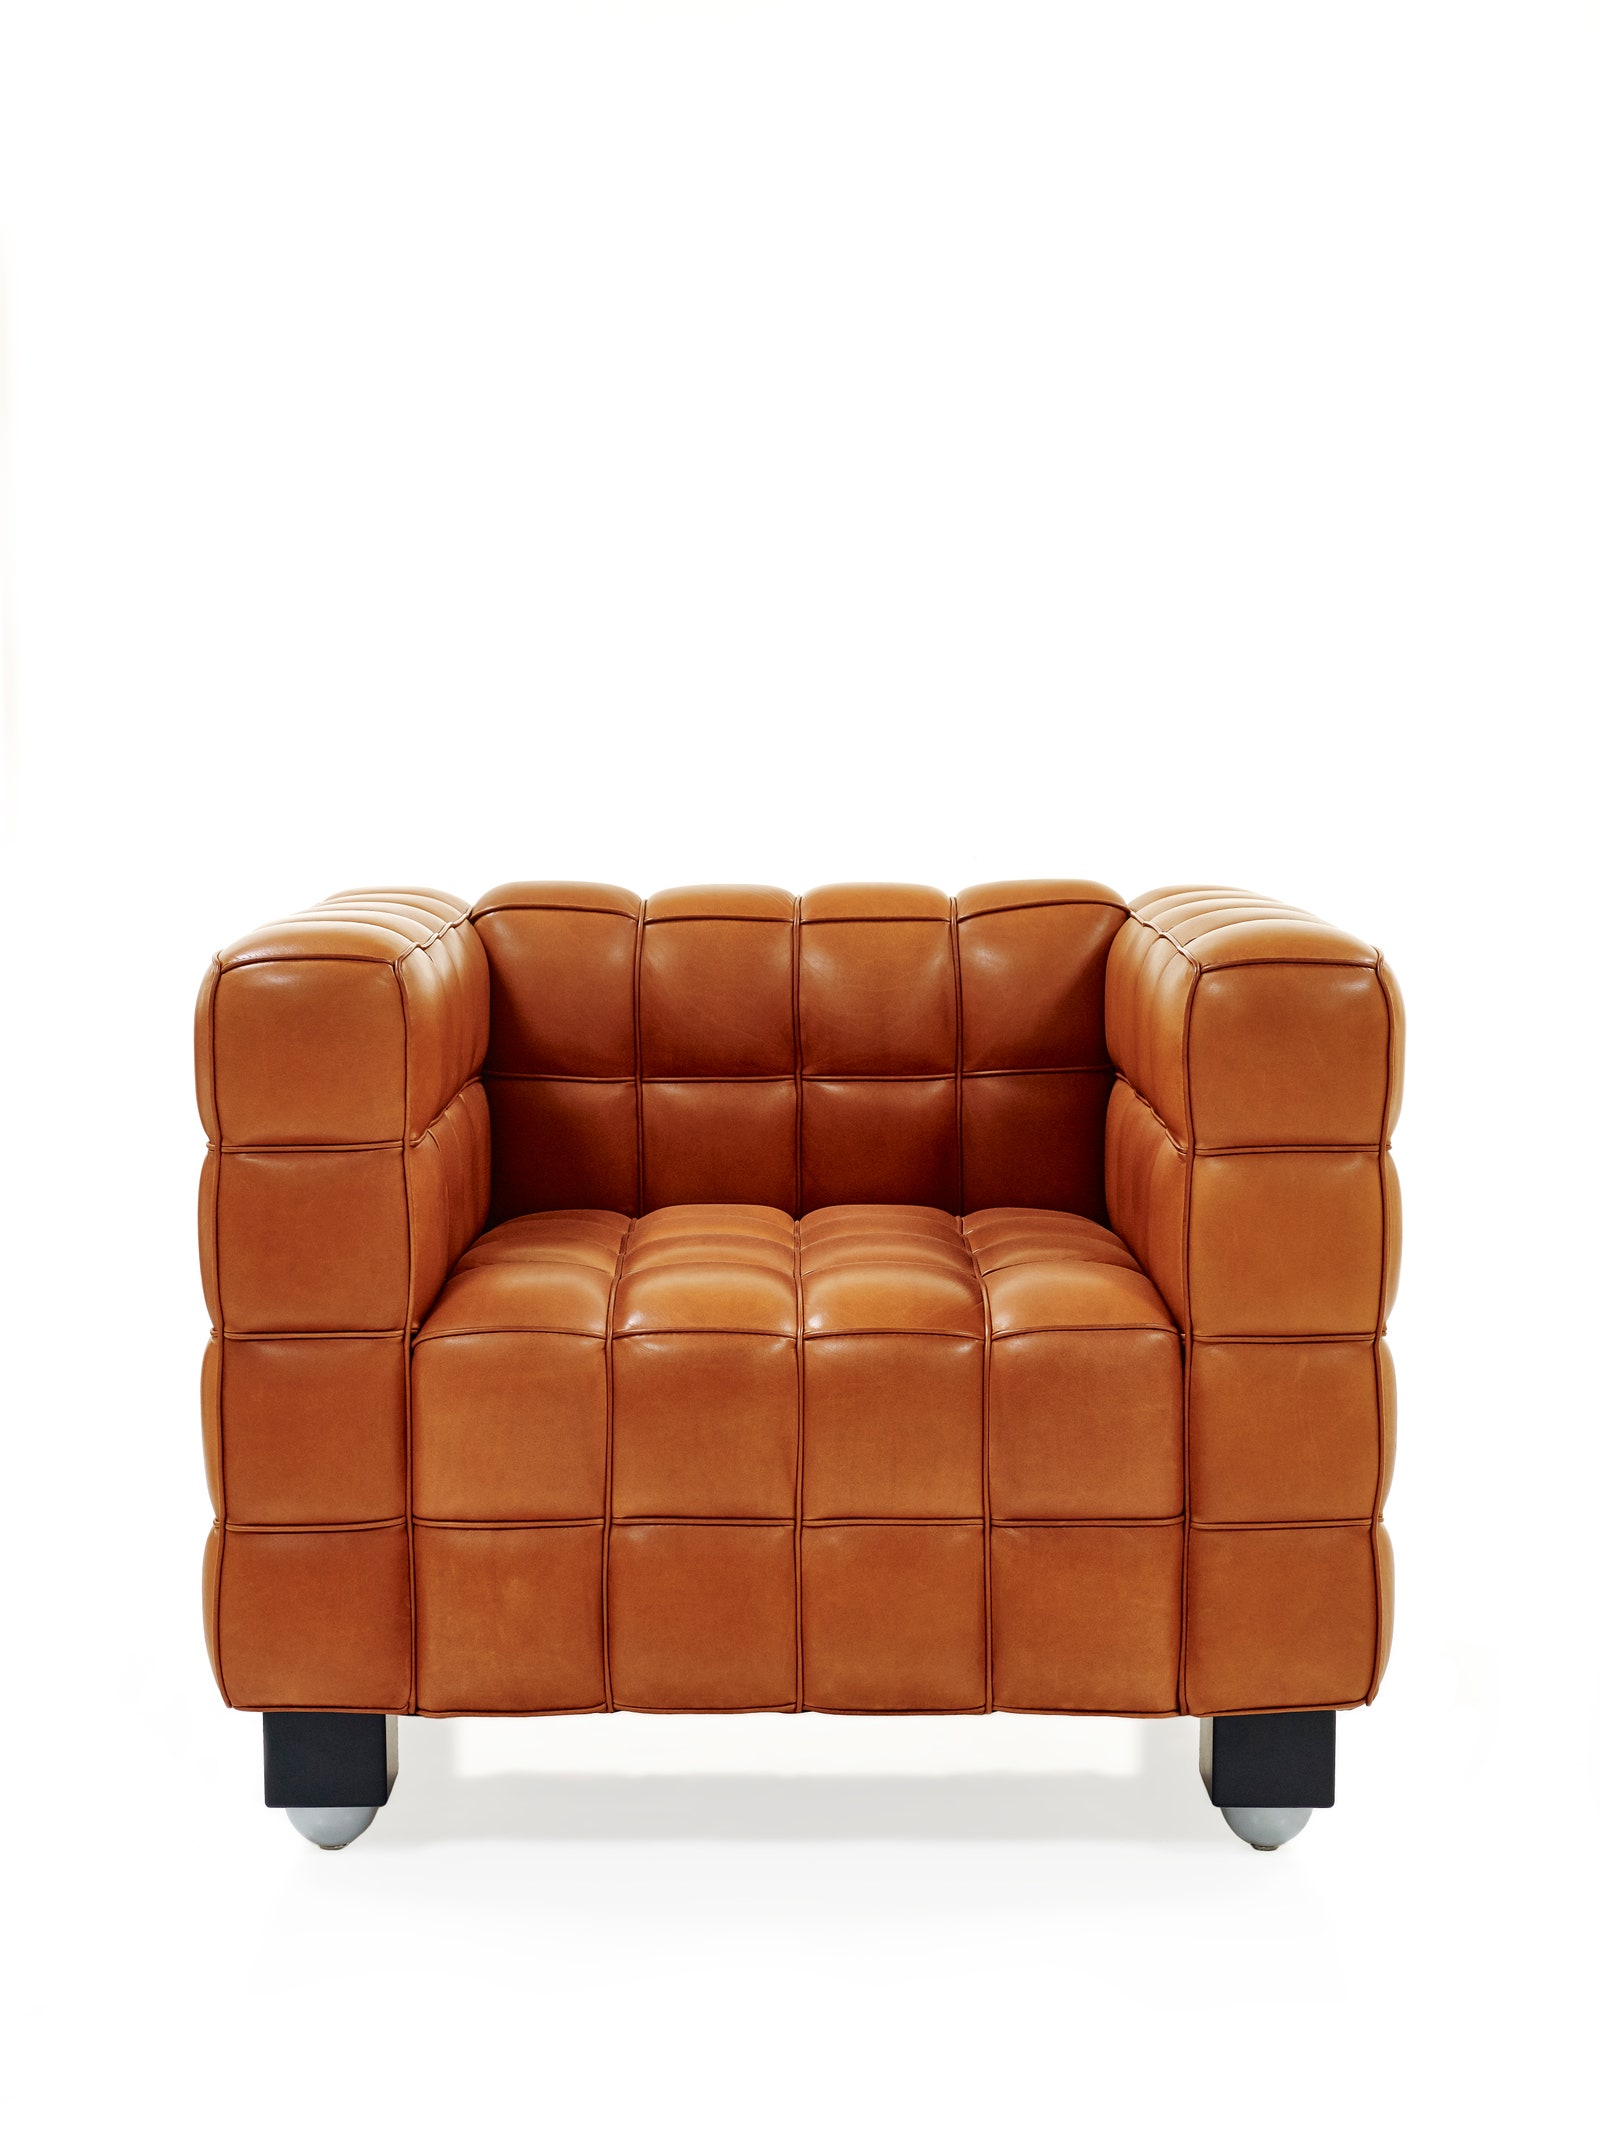 Kubus Fauteuil in Natural brandy